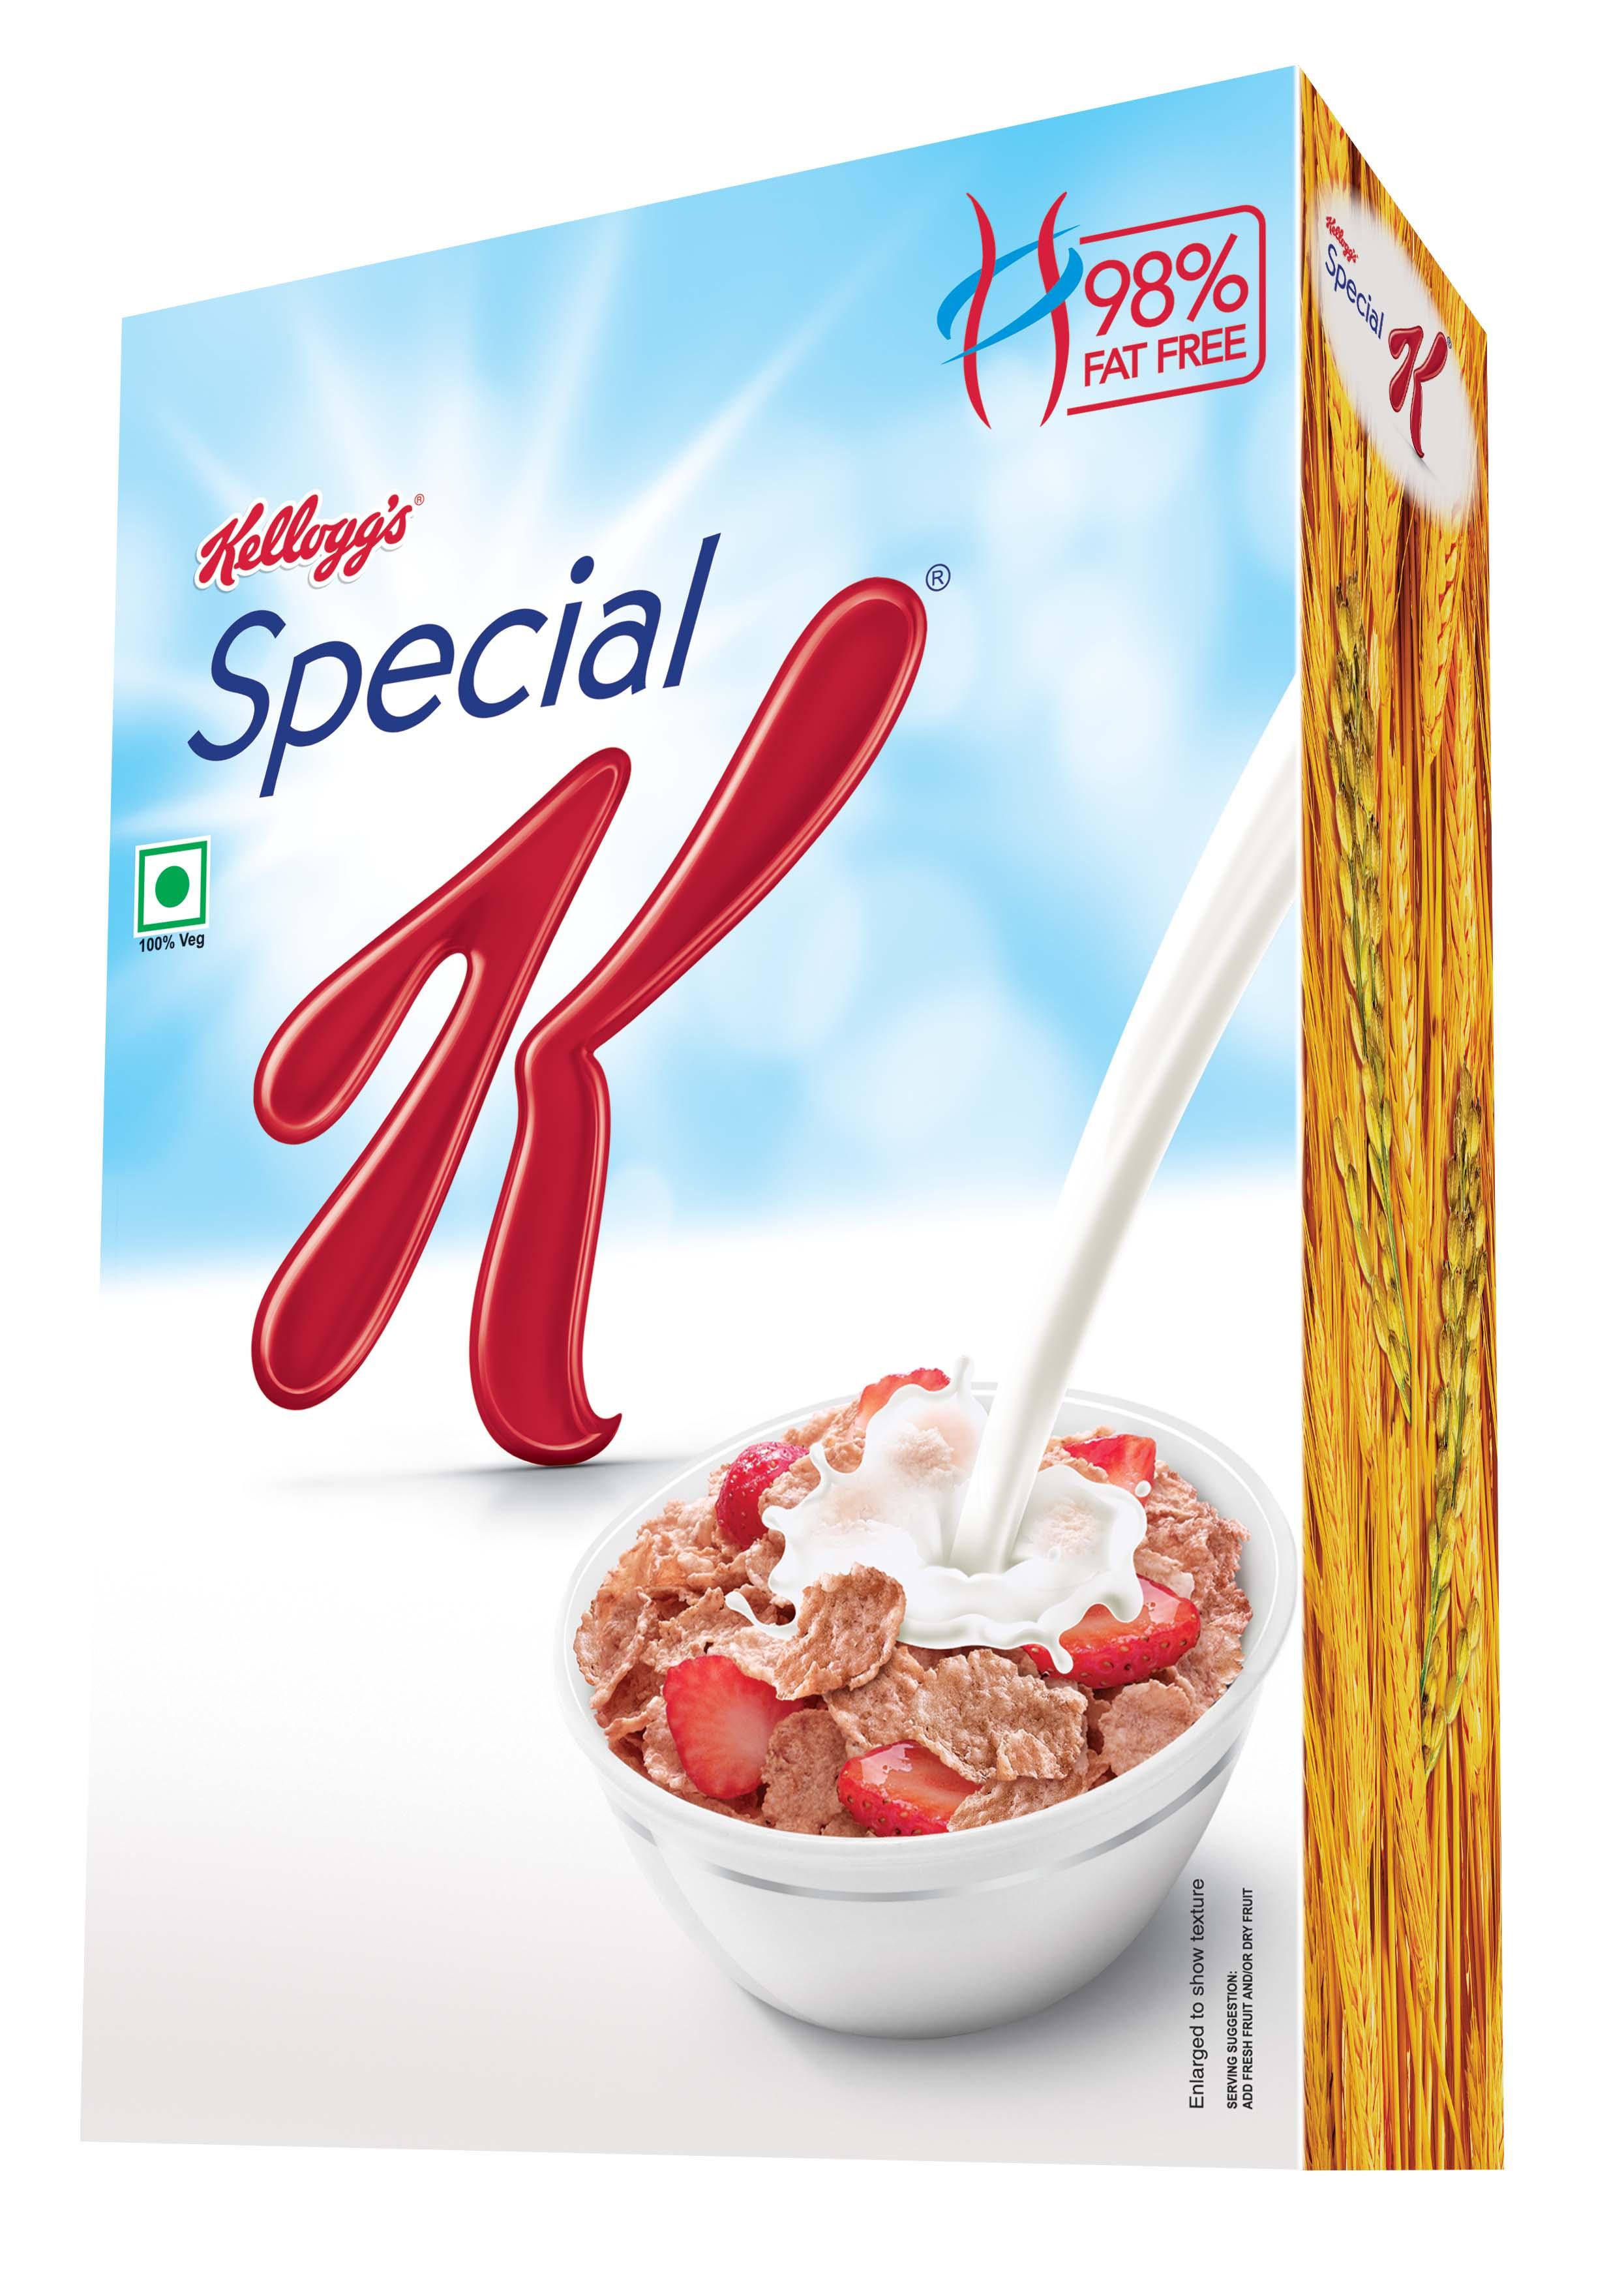 KELLOGG'S SPECIAL K Photos, Image and Wallpapers